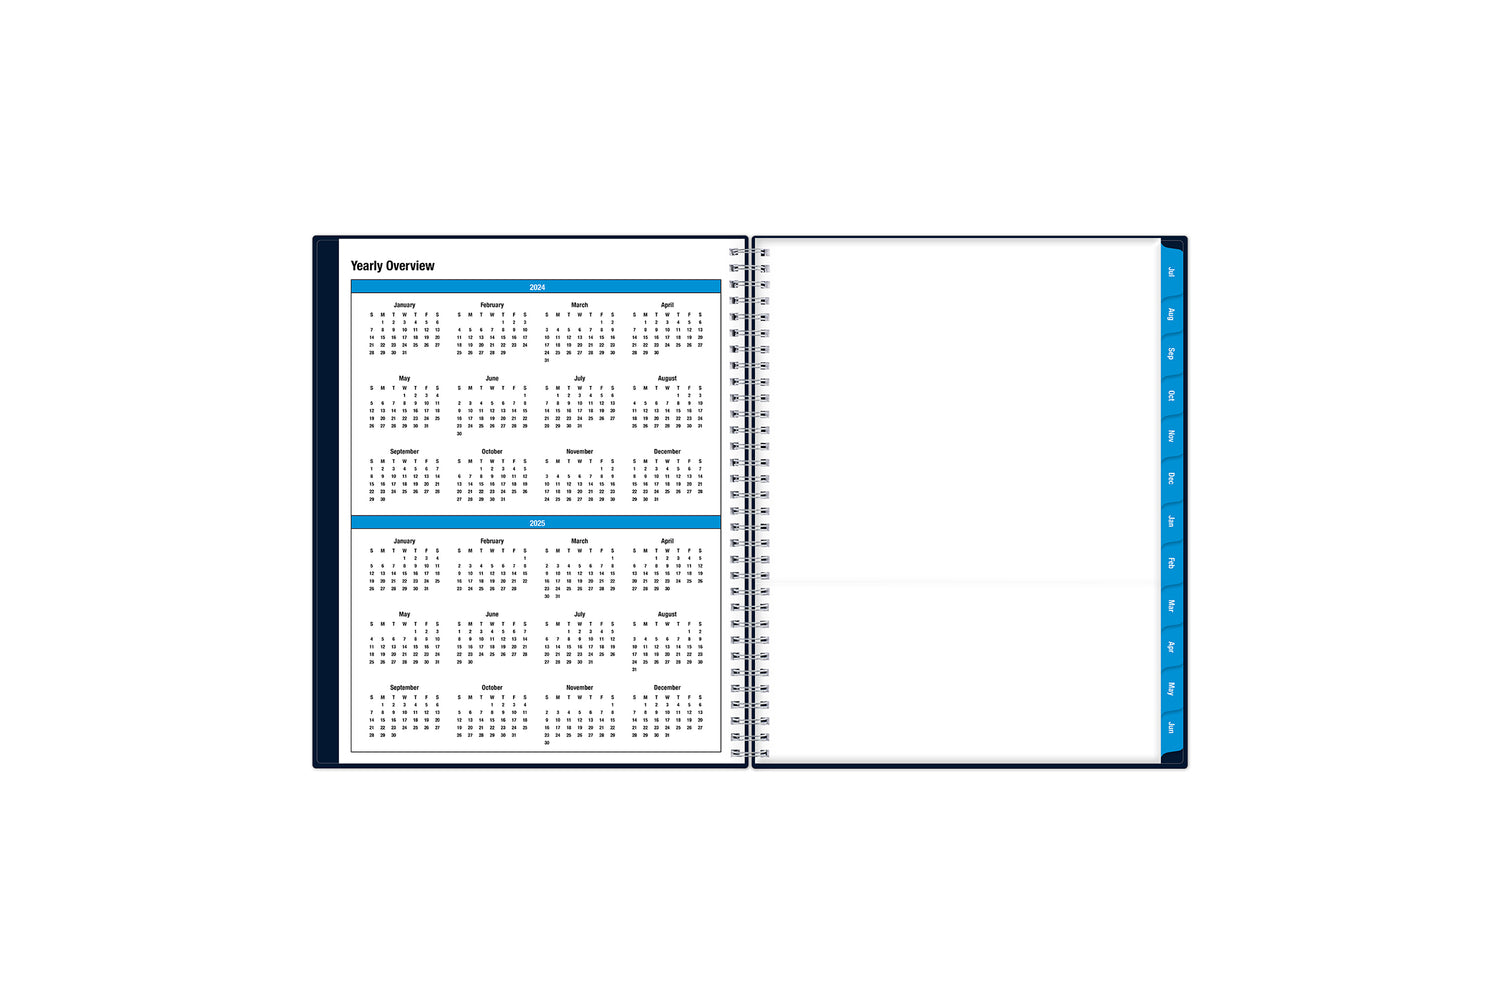  yearly overview reference calendars and owner information and yearly goals